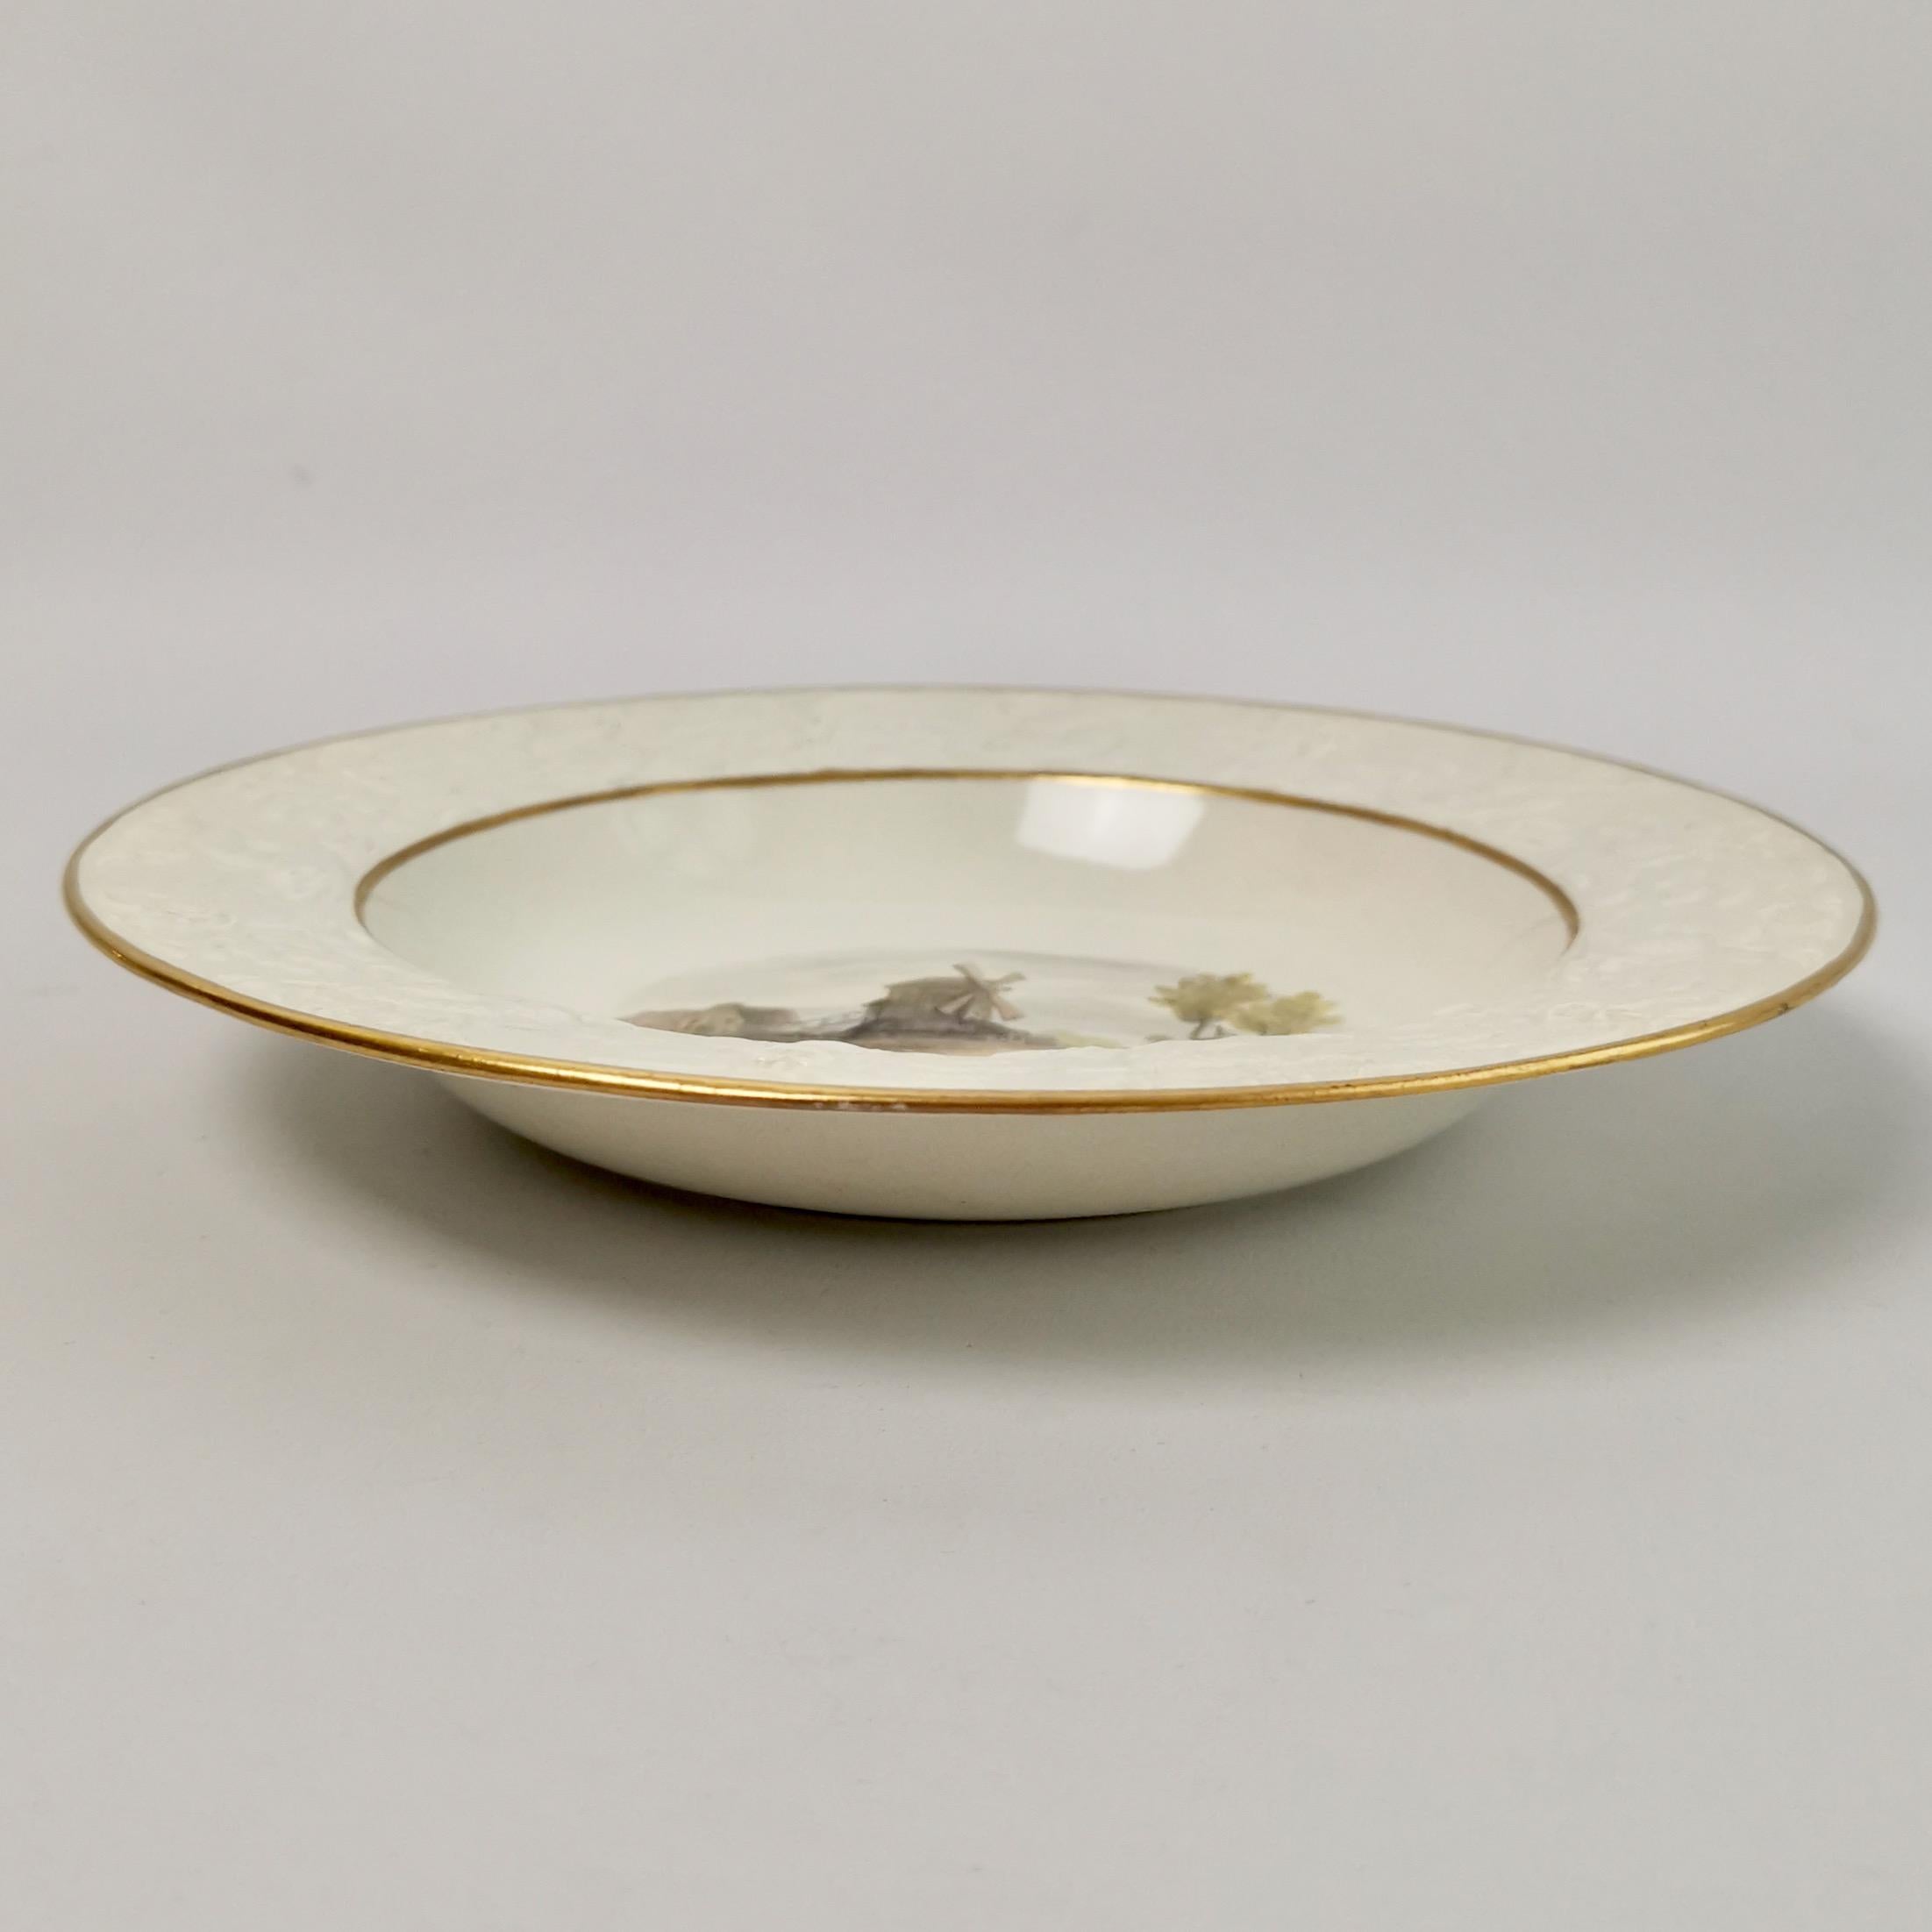 Wilson Creamware Plate, Blind Moulded with Windmill Landscape, ca 1800 1